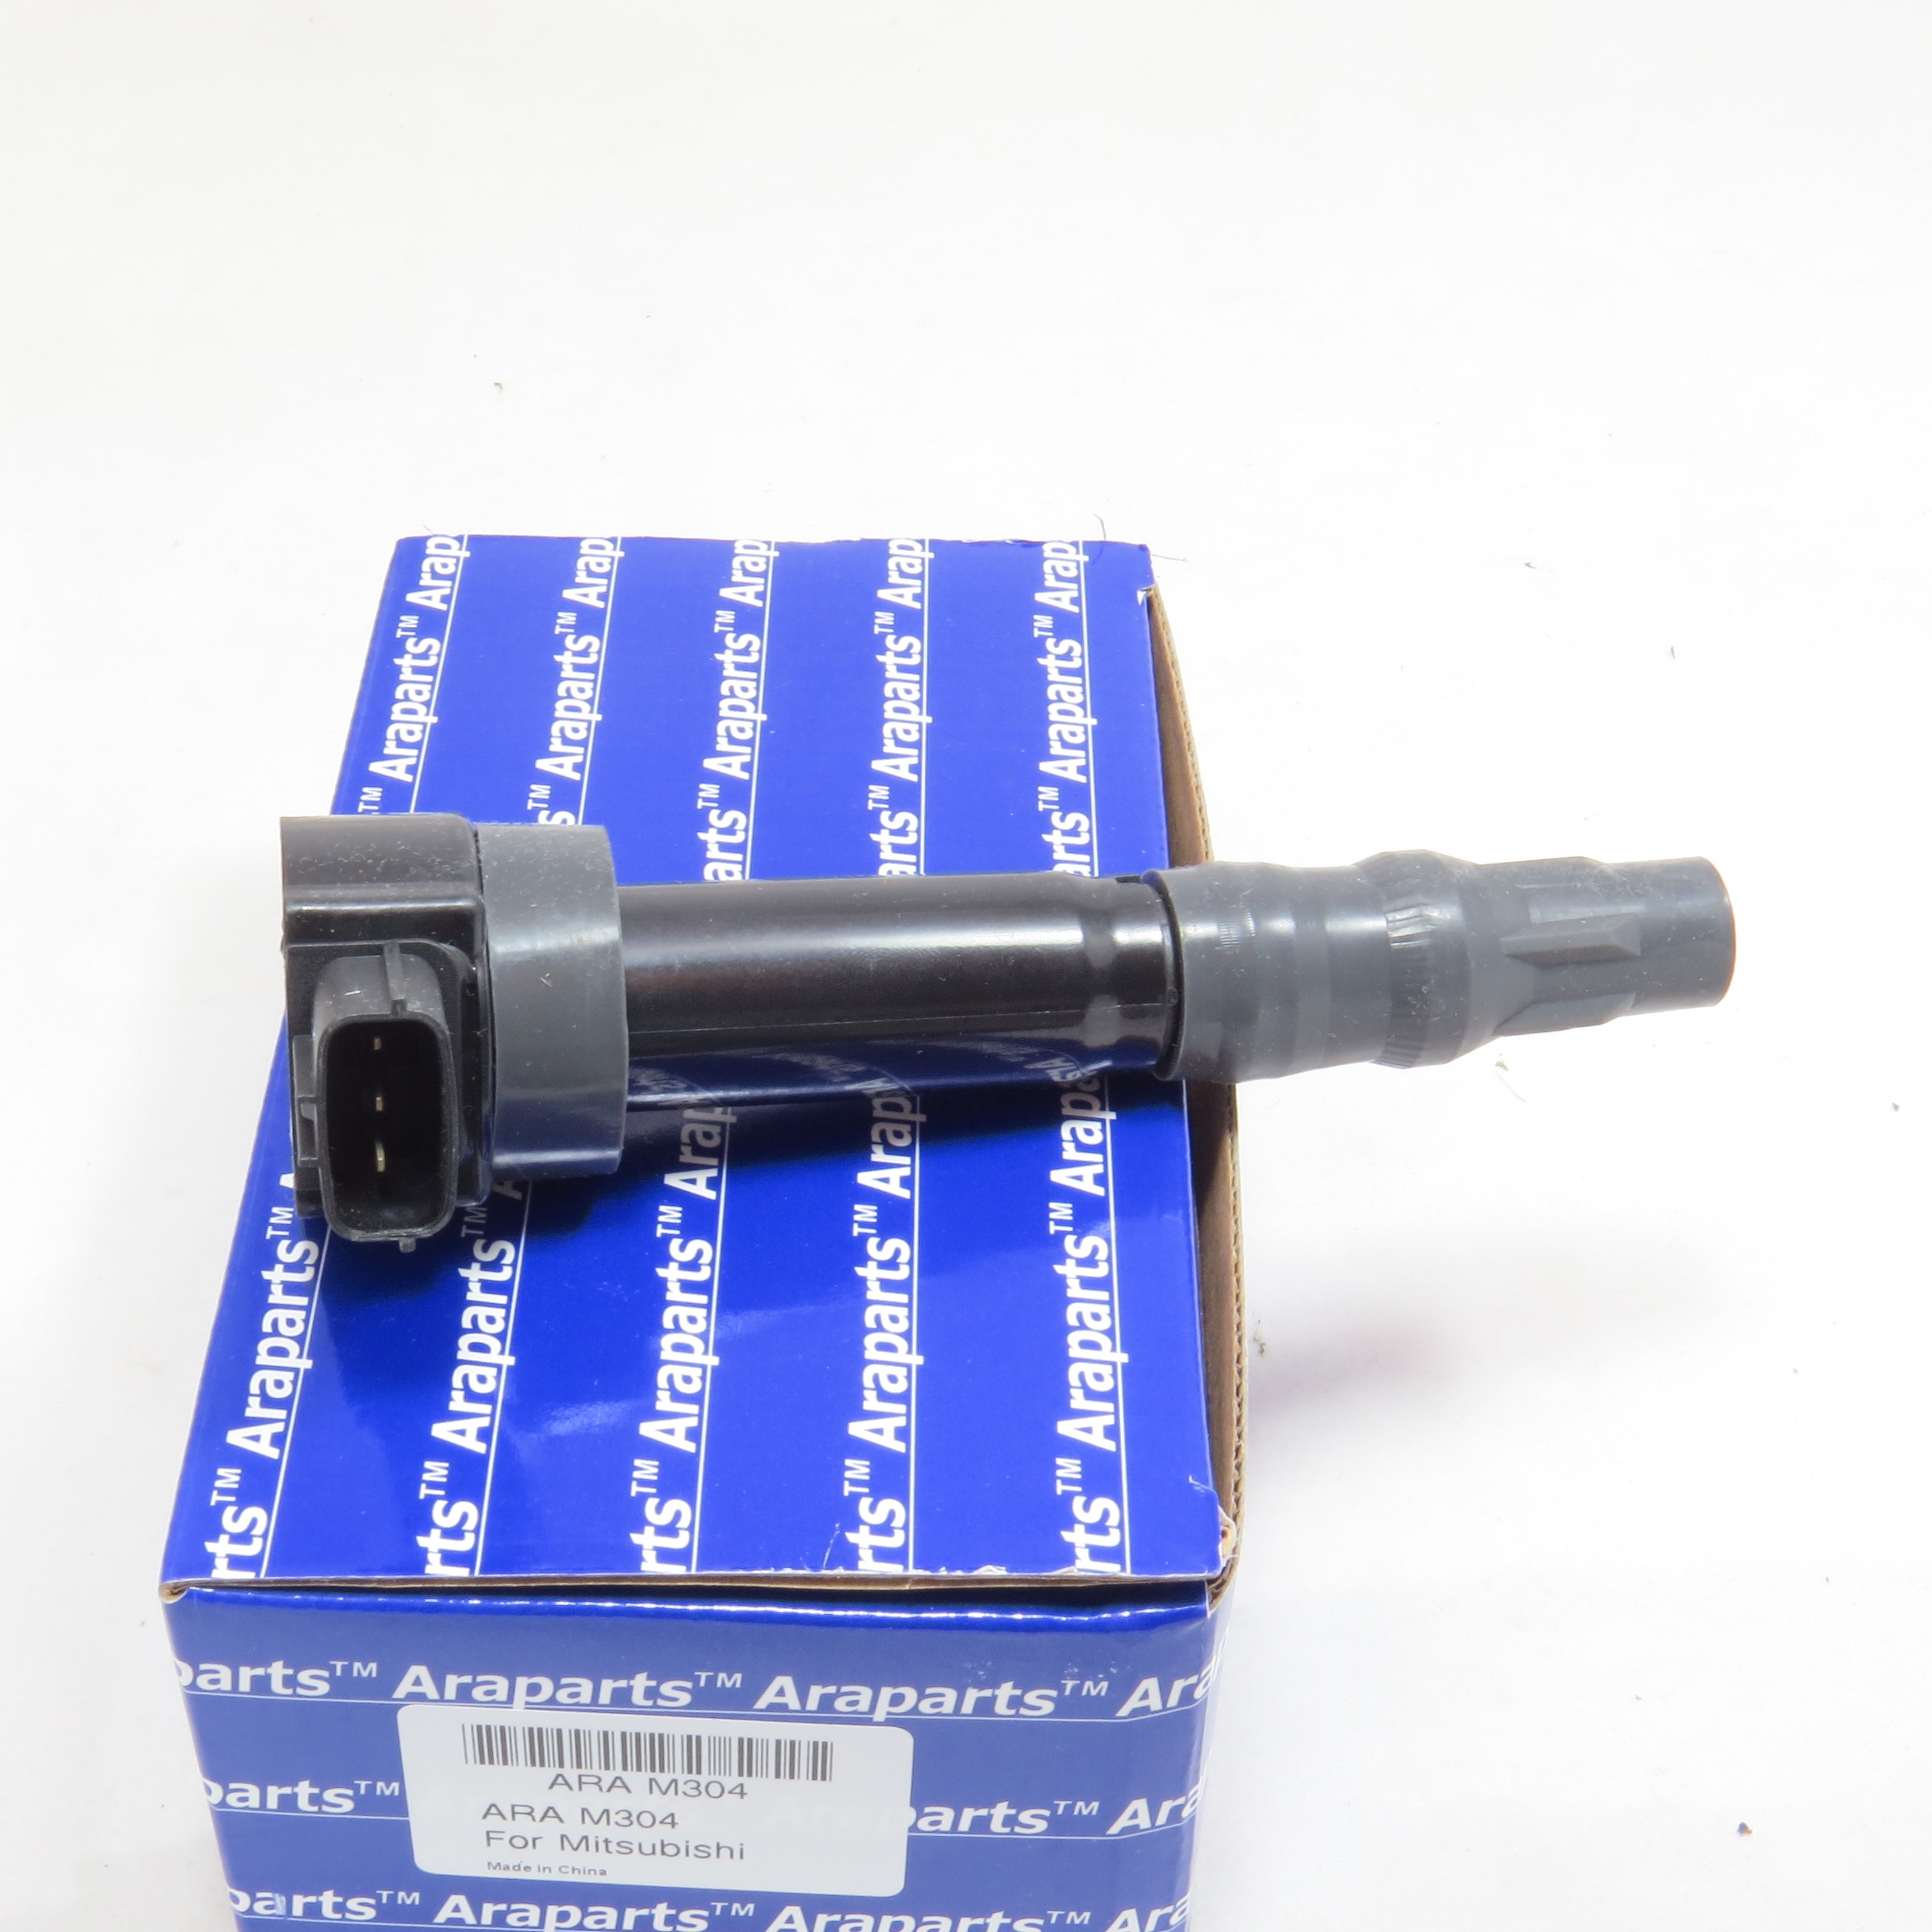 Picture of ignition coils for 2008 Mitsubishi Galant